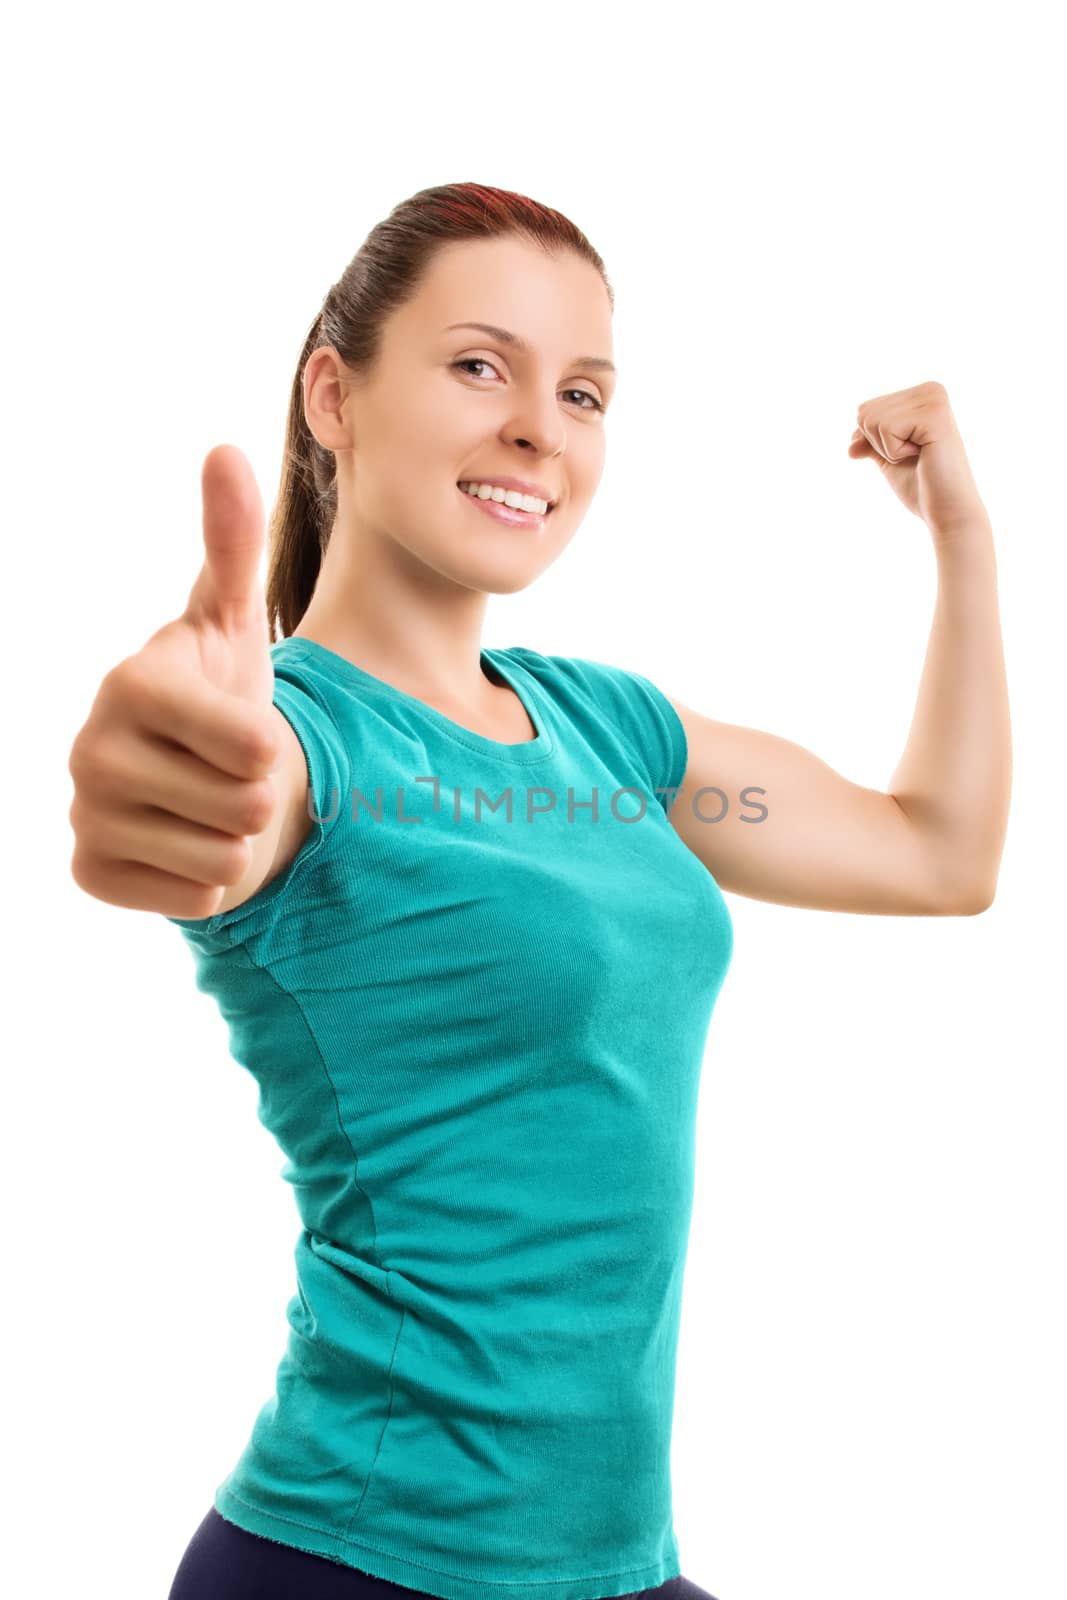 Willpower and strength to be fit. Smiling young athlete giving thumbs up, isolated on white background.